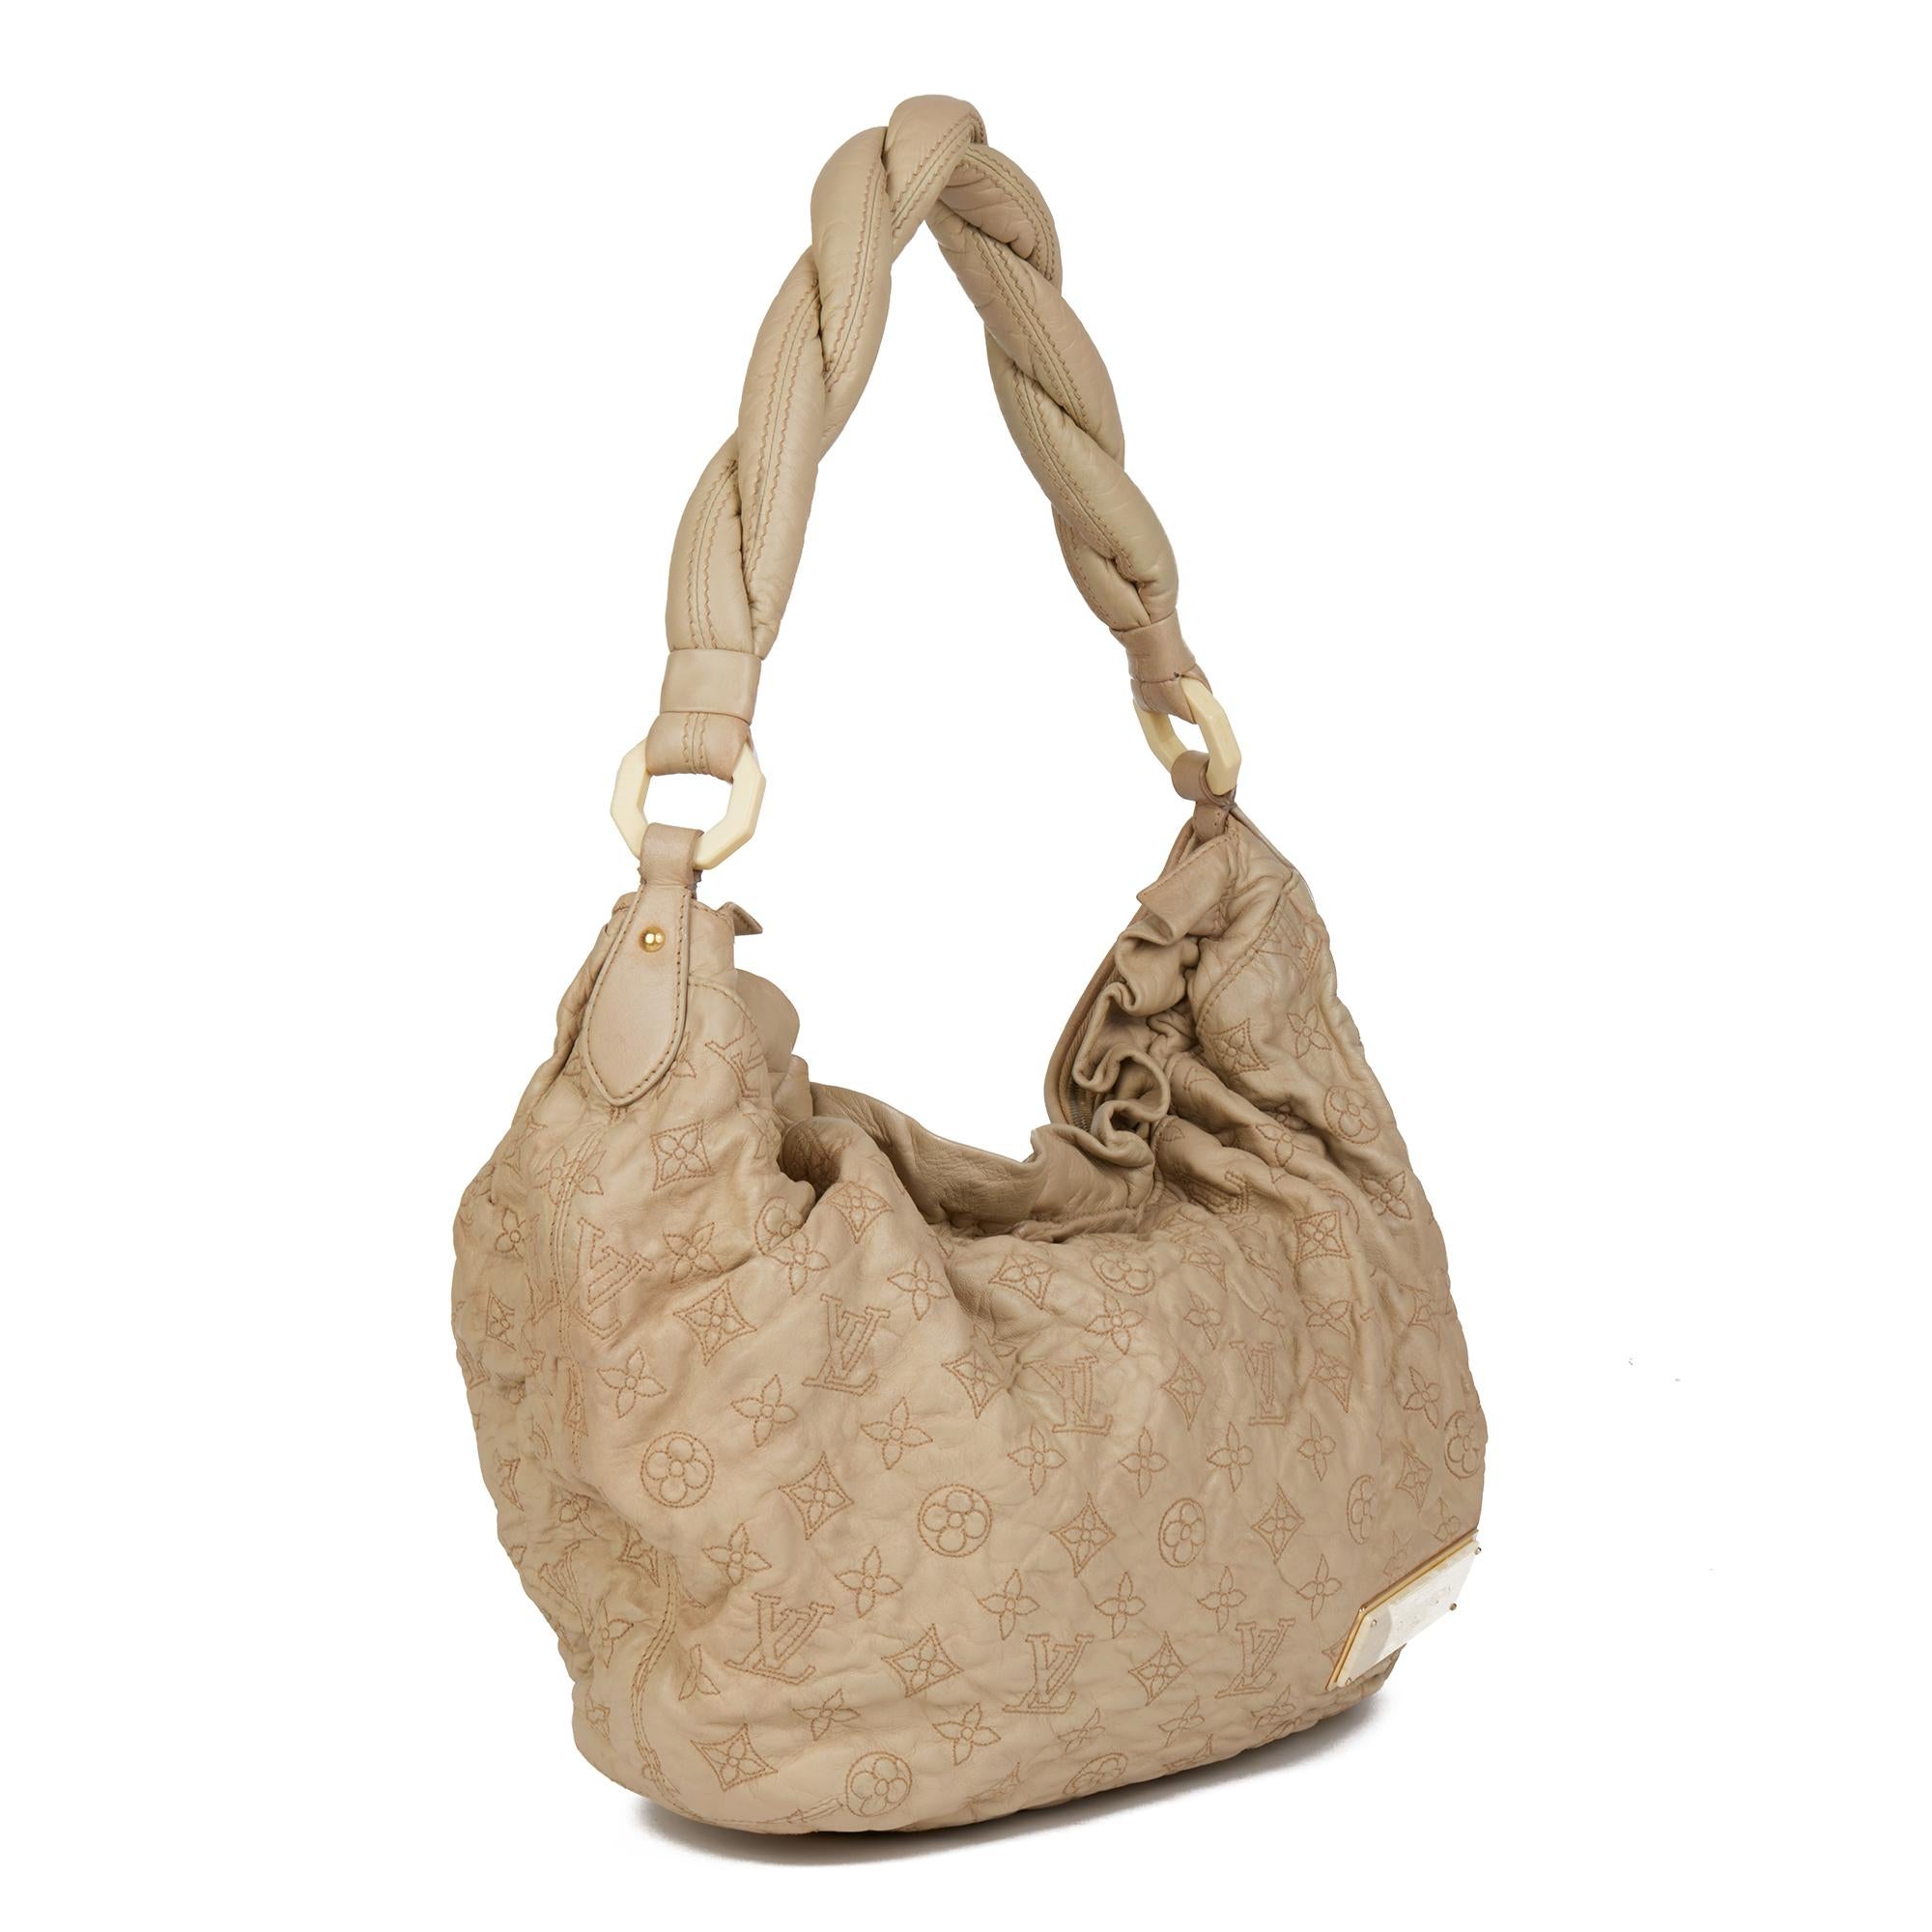 LOUIS VUITTON
Beige Monogram Lambskin Olympe Nimbus GM

Xupes Reference: CB680
Serial Number: RC0007
Age (Circa): 2007
Accompanied By: Louis Vuitton Dust Bag
Authenticity Details: Date Stamp (Made in Italy)
Gender: Ladies
Type: Shoulder,